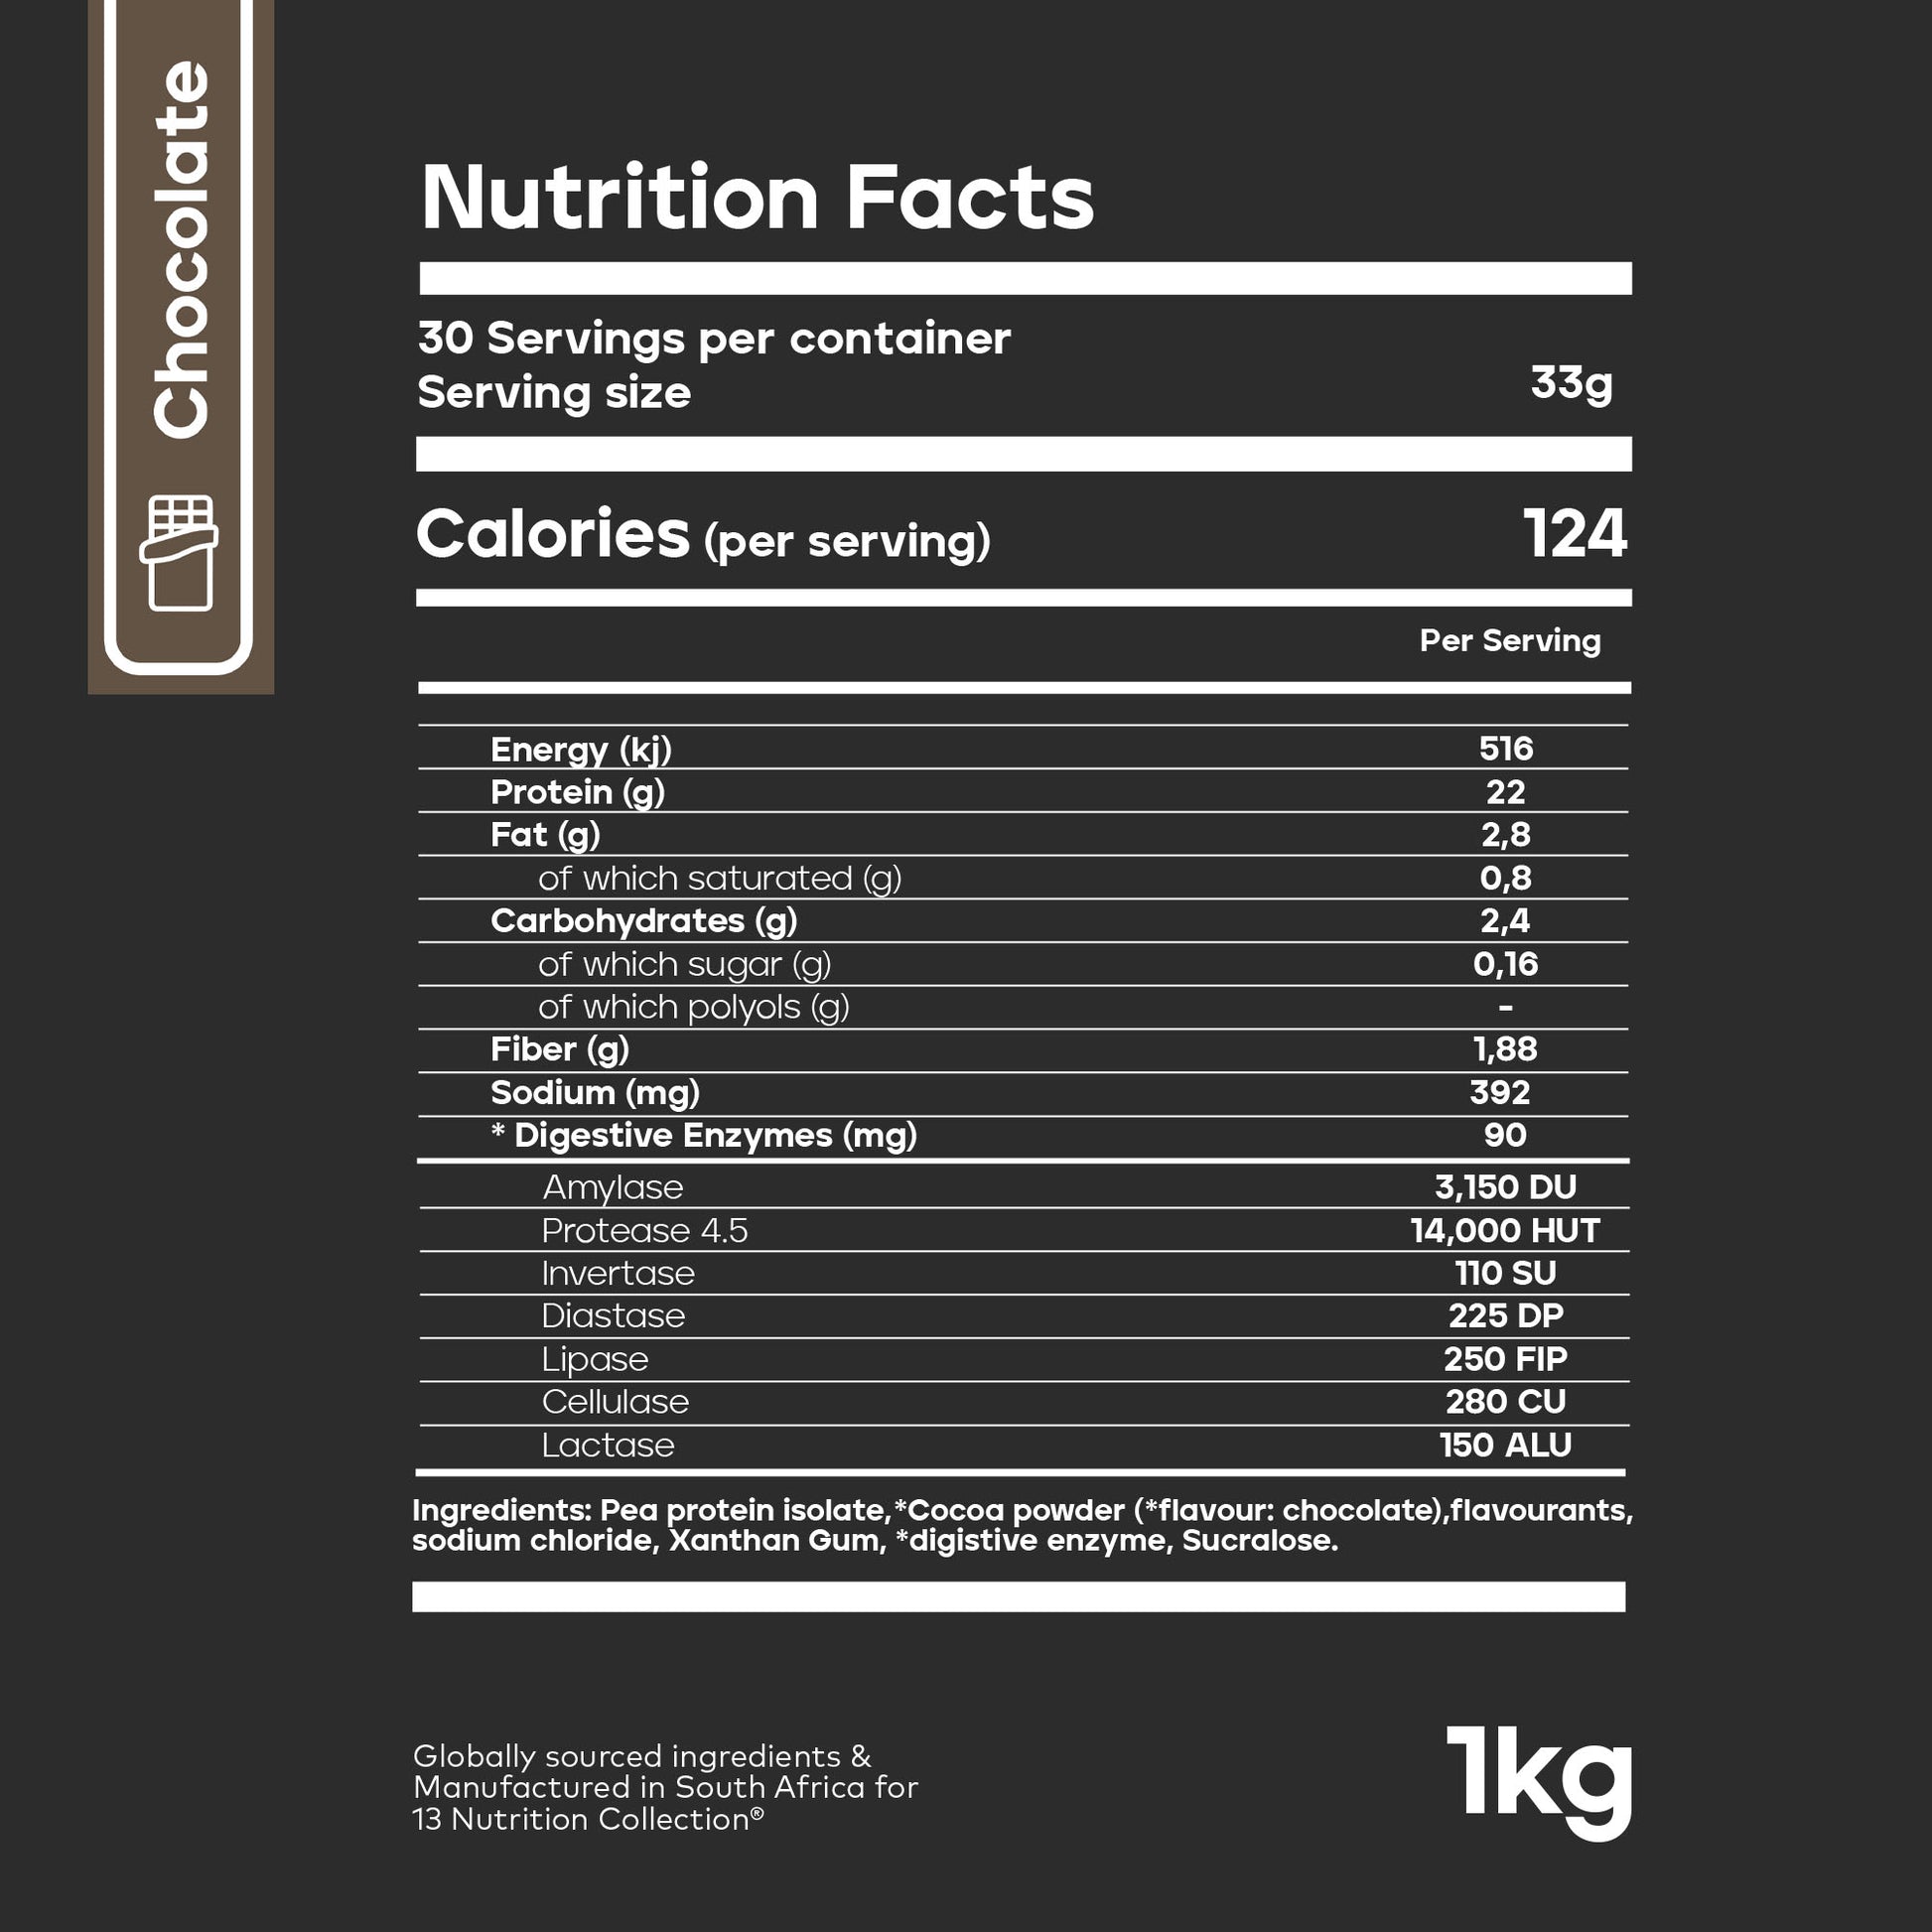 13 Nutrition - Vegan Protein - Nutrion Facts